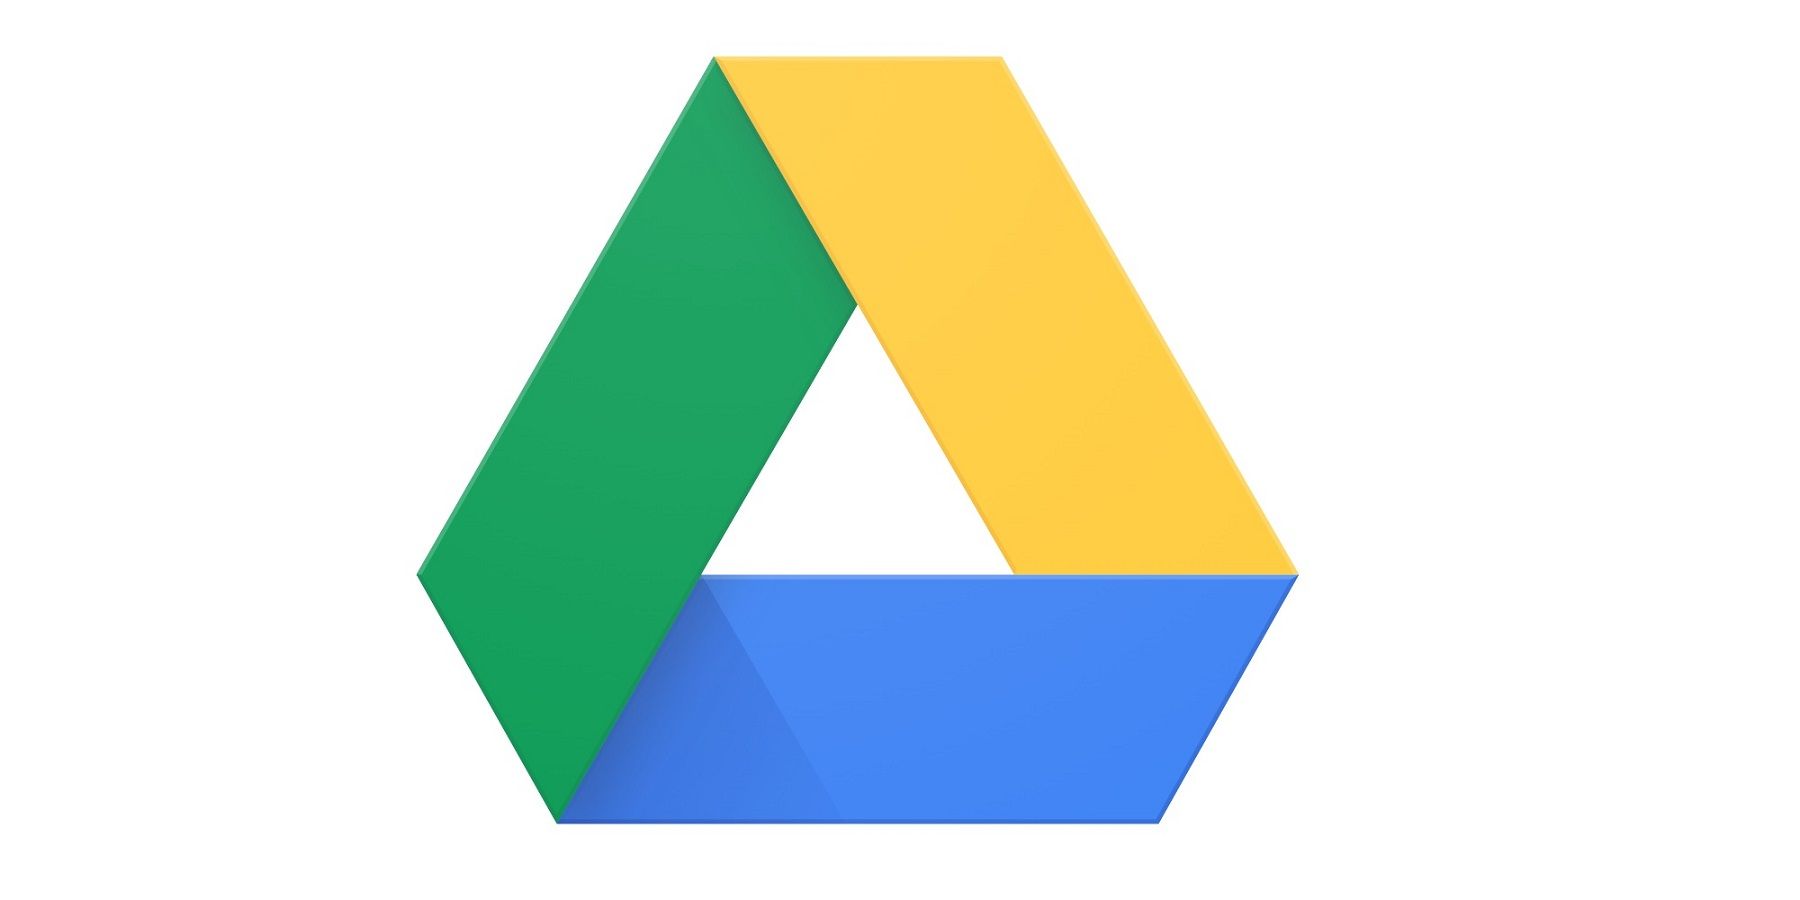 The logo for the Google Drive app.